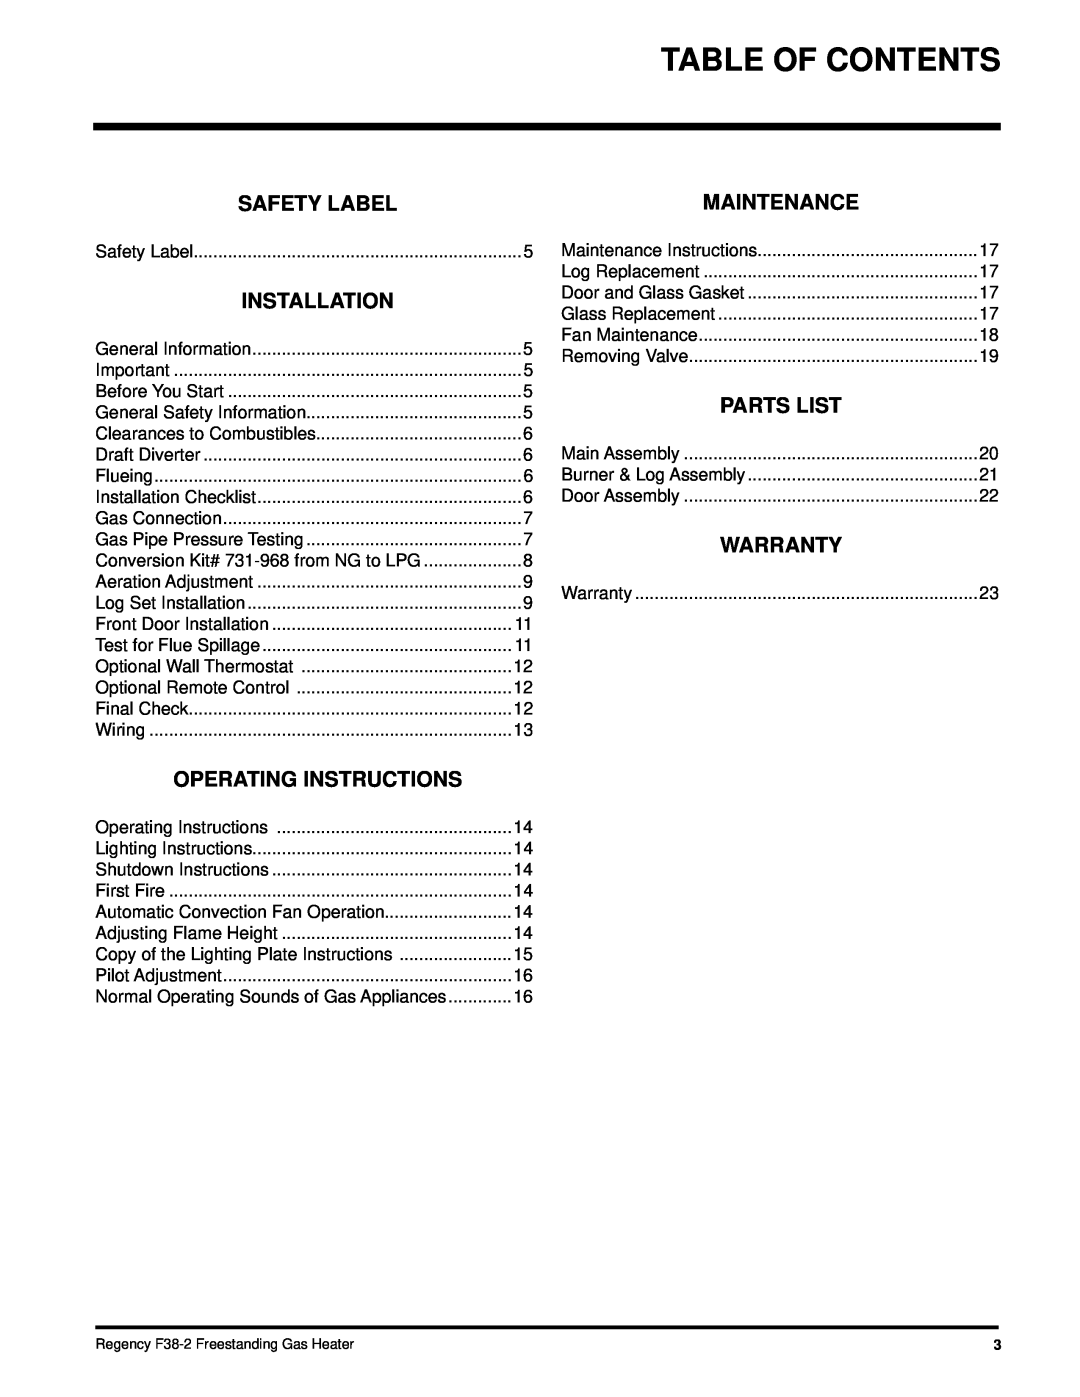 Regency F38-LPG2 Table Of Contents, Safety Label, Installation, Operating Instructions, Parts List, Warranty, Maintenance 